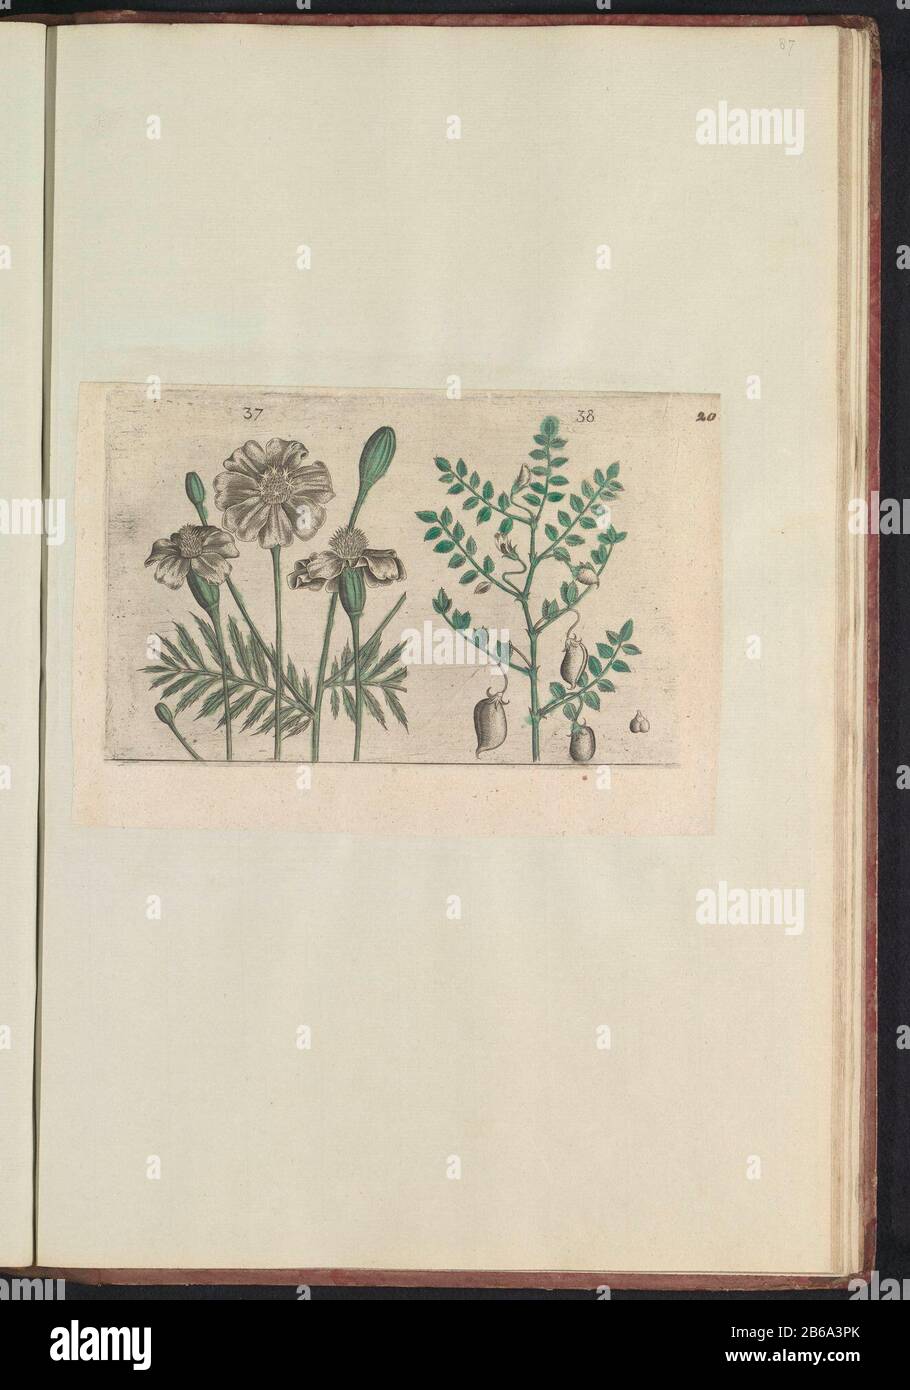 Tagetes (Tagetes patula) and chickpea (Cicer arietinum) Tagetes and chickpea. Figs. 37 and 38, numbered on a leaf with the hand 20. In: Anselmi Boëtii the Boot I.C. Brugensis & Rodolphi II. Imp. Novel. a medical cubiculis Florum, Herbarum, ac fructuum selectiorum icones, and vires pleraeque hactenus ignotæ. Part of the album with sheets and plates from the Boodts herbarium of 1640. The twelfth twelve albums of watercolors of animals, birds and plants are known around 1600, commissioned by Emperor Rudolf II. Manufacturer : printmaker: anonymous to print from: Crispin on de Passe (I) Place manuf Stock Photo